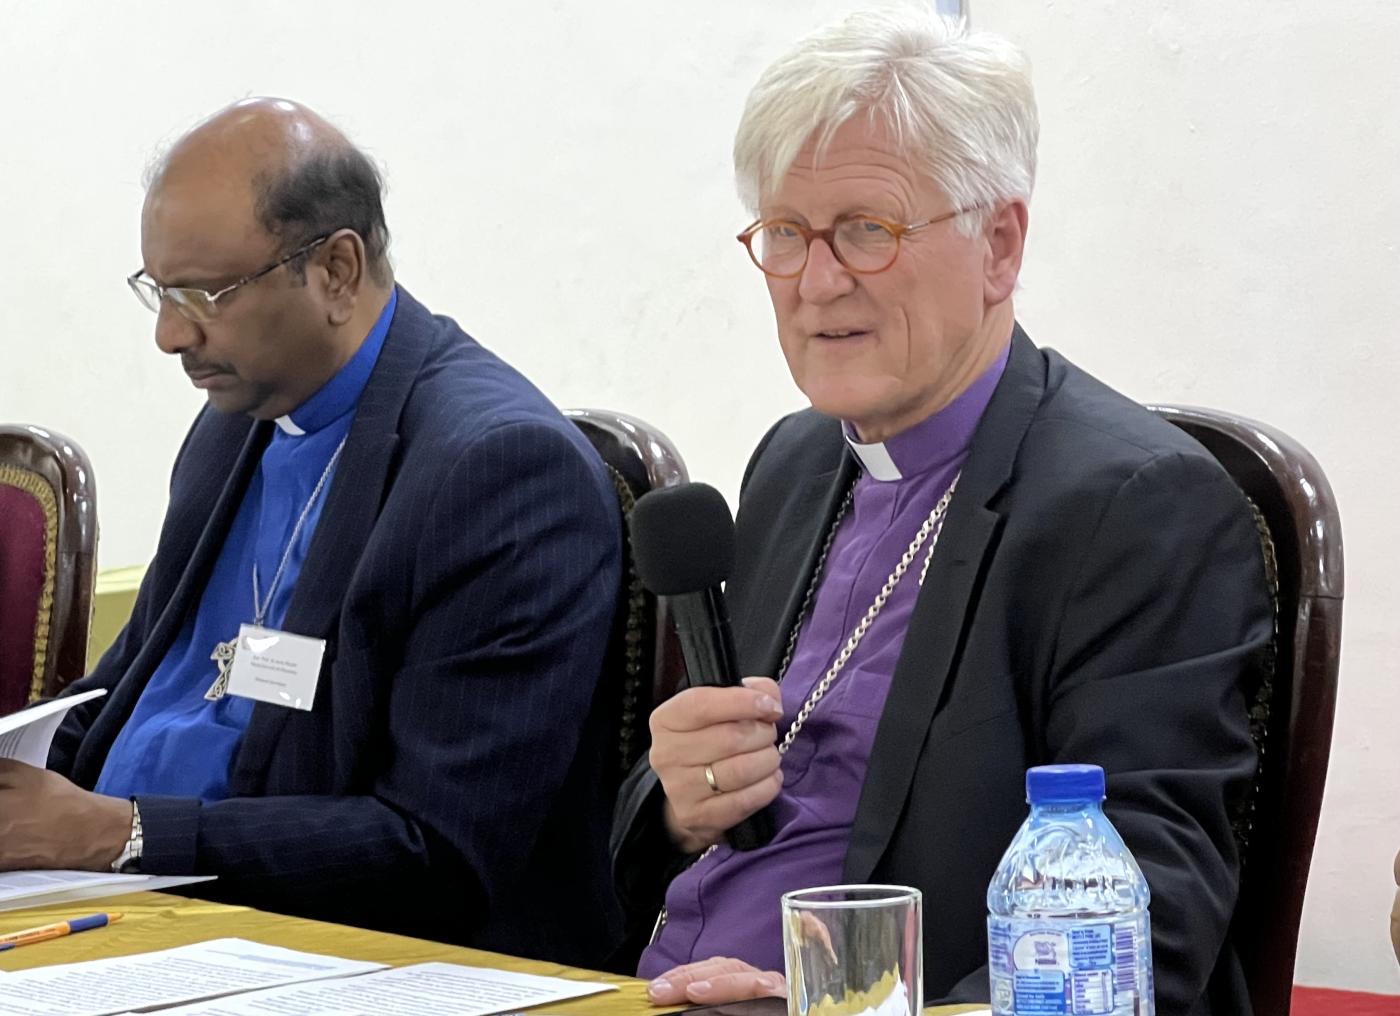 WCC moderator addressing the WCC executive committee